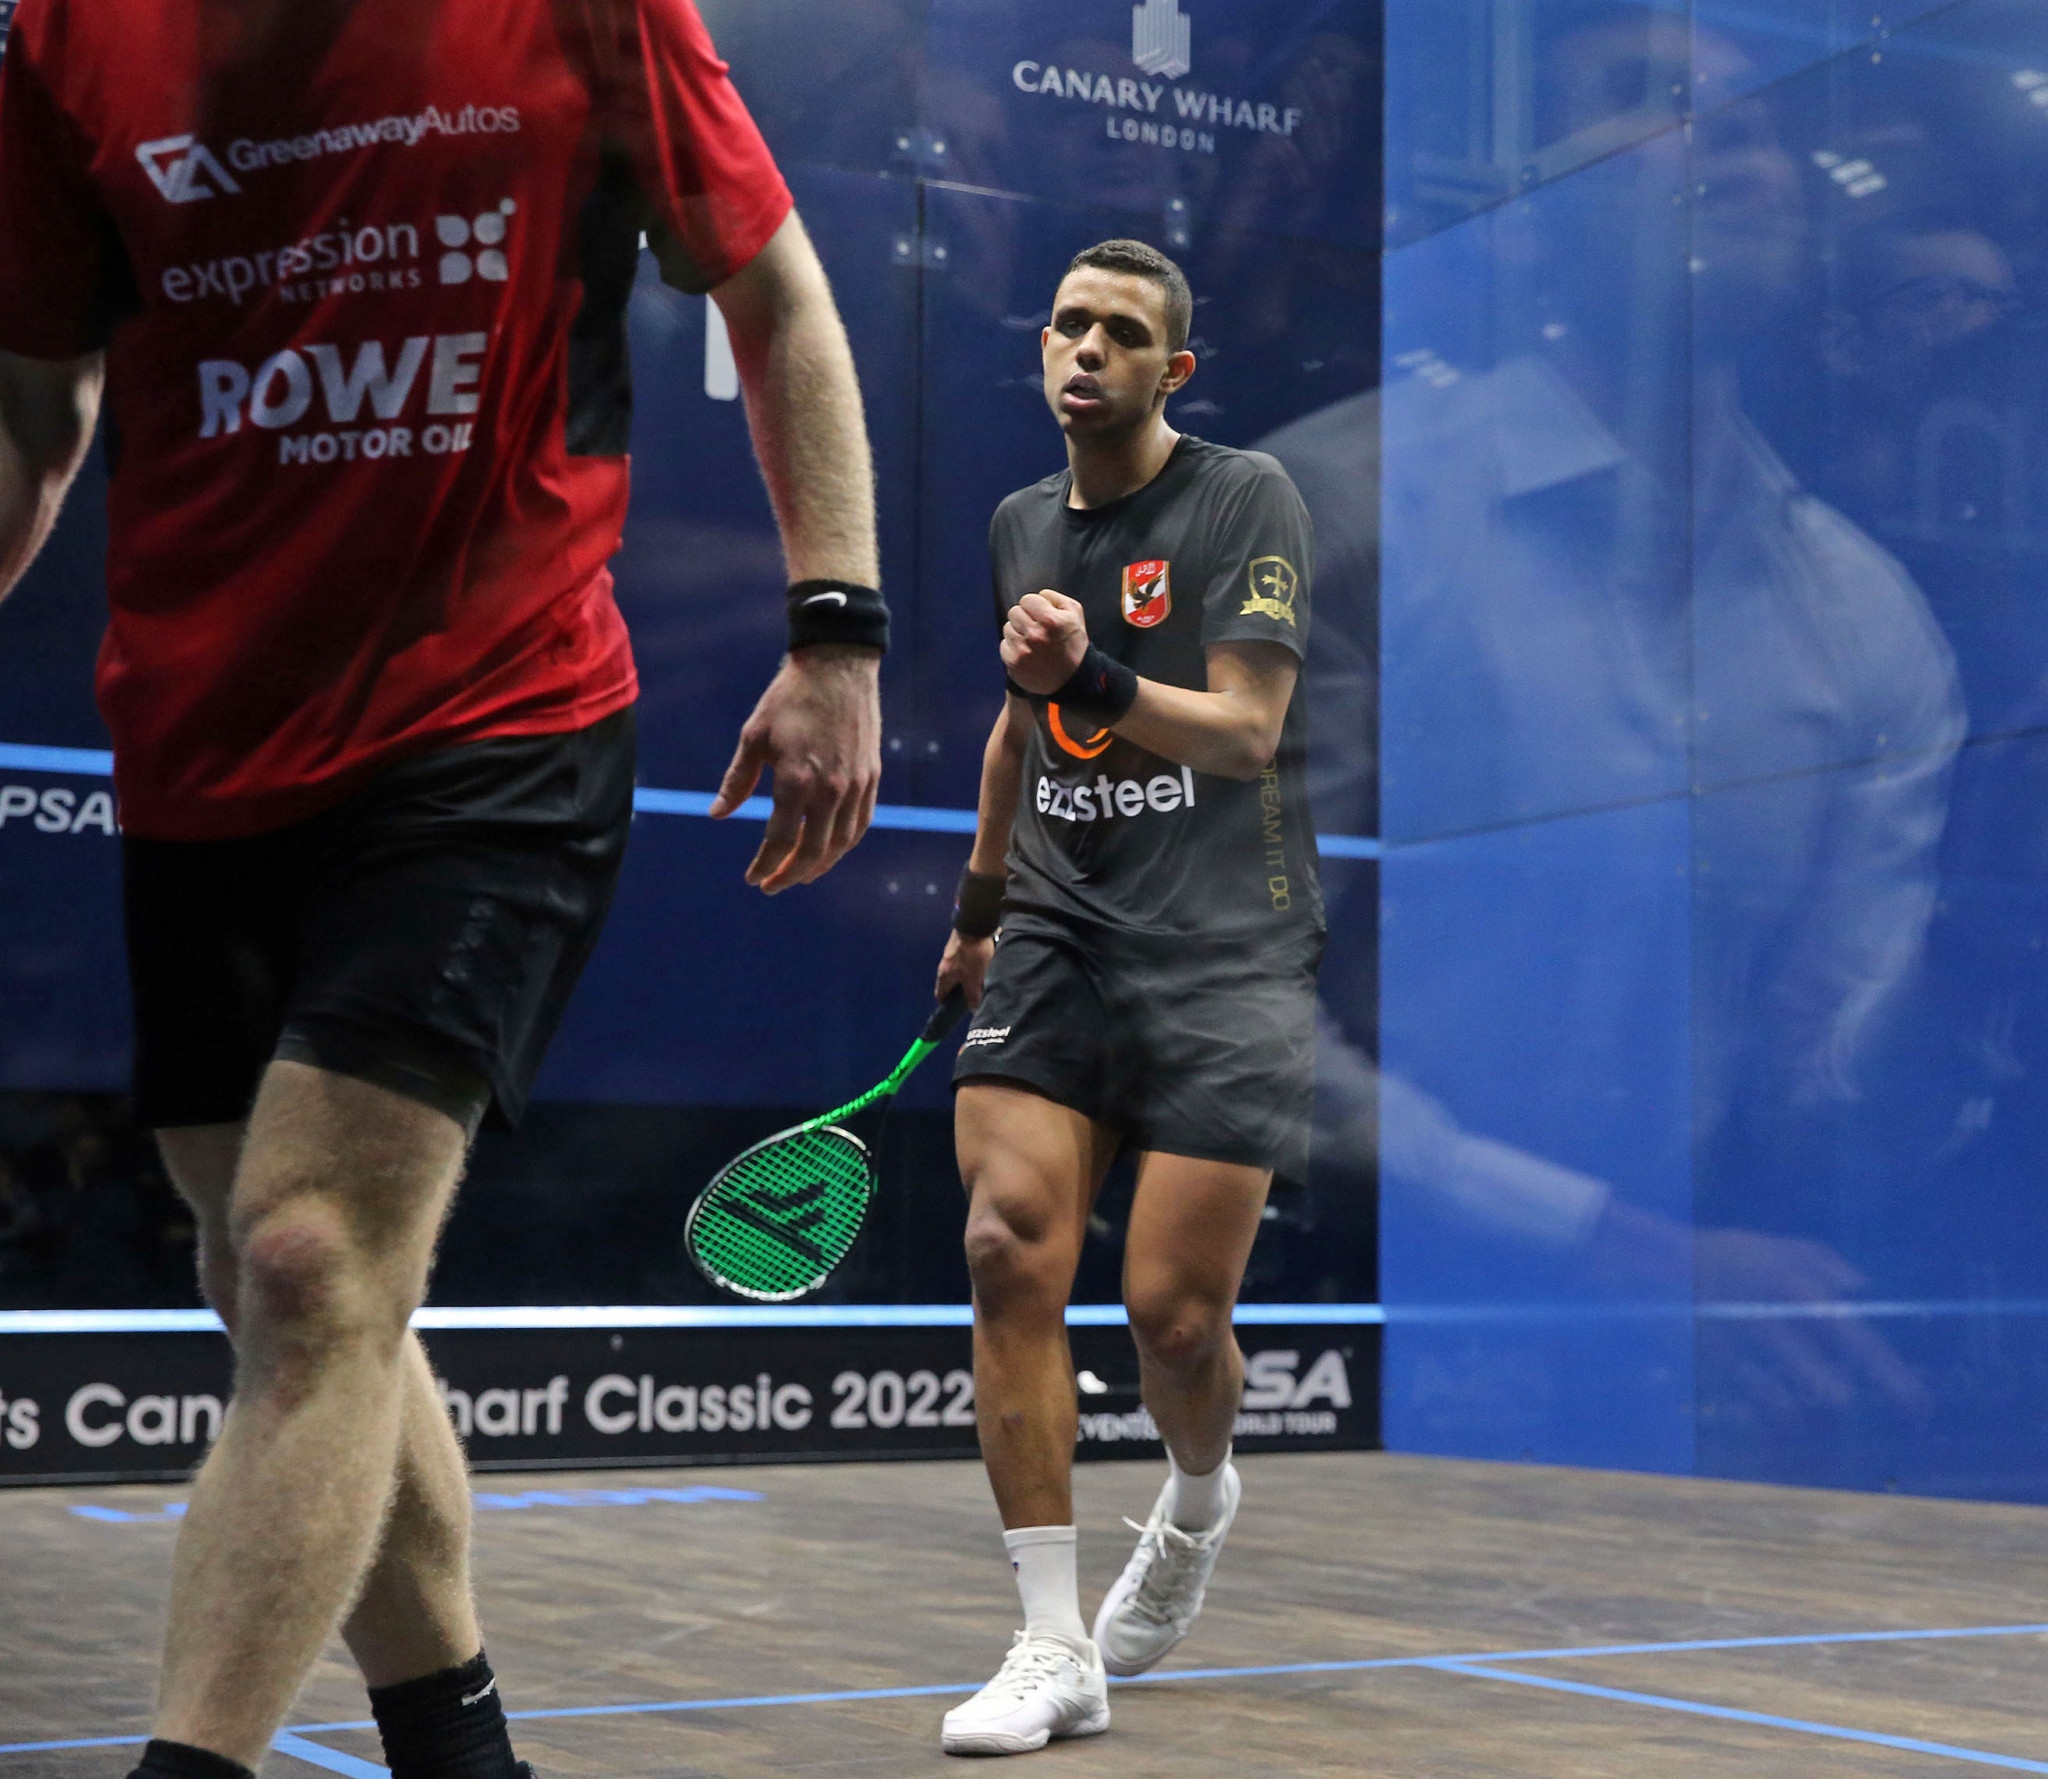 Asal battles past Makin to set up semi-final clash against Elias at Canary Wharf Classic 